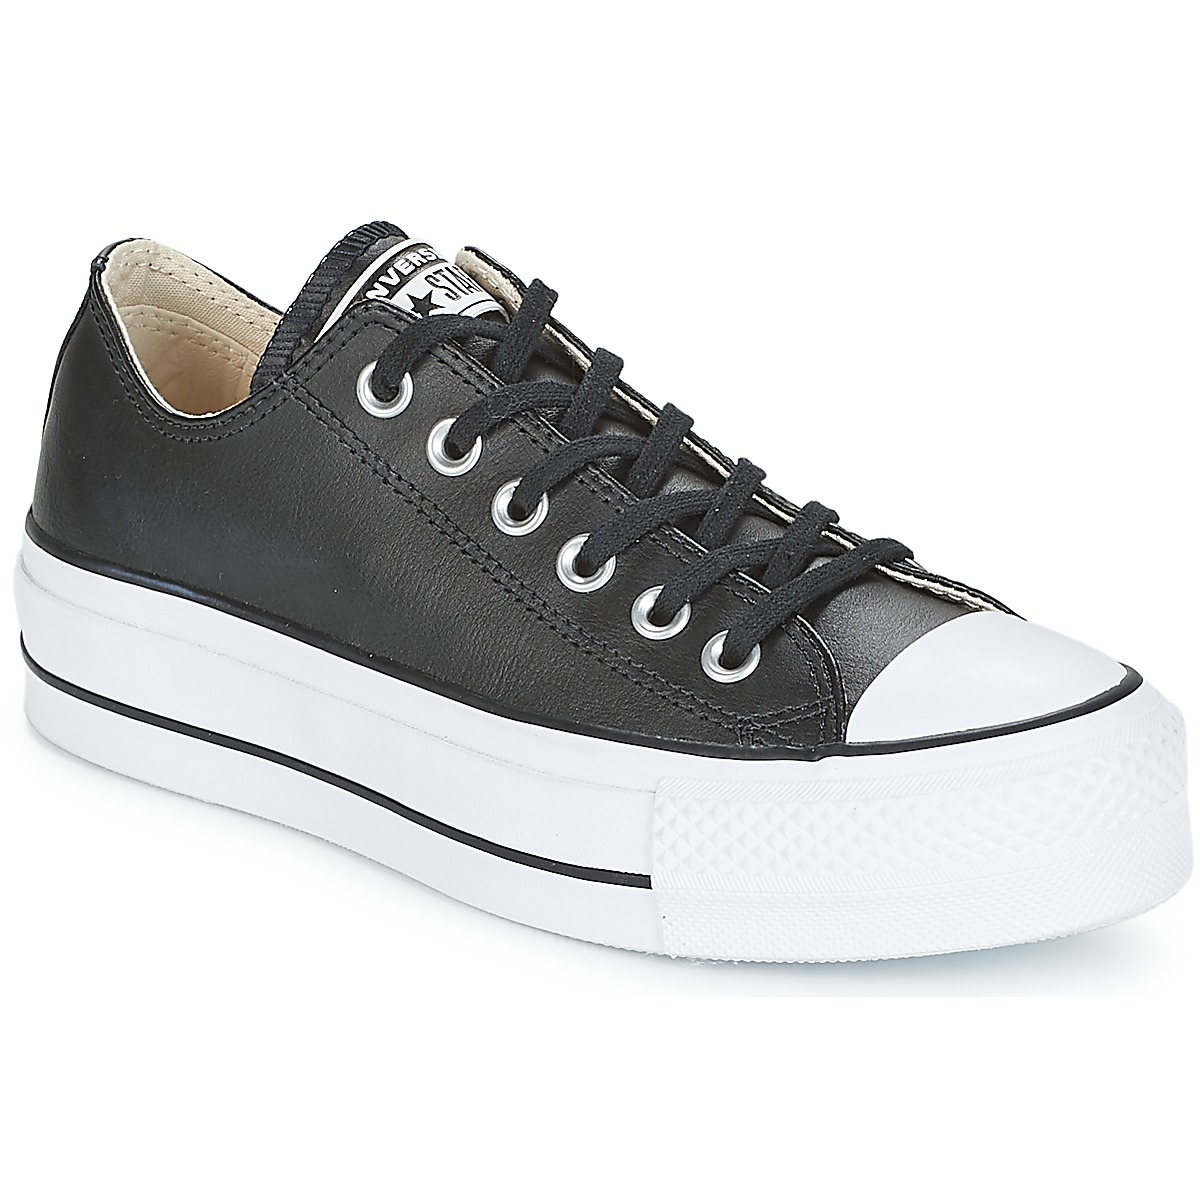 Kengät Converse CHUCK TAYLOR ALL STAR LIFT CLEAN OX LEATHER 36